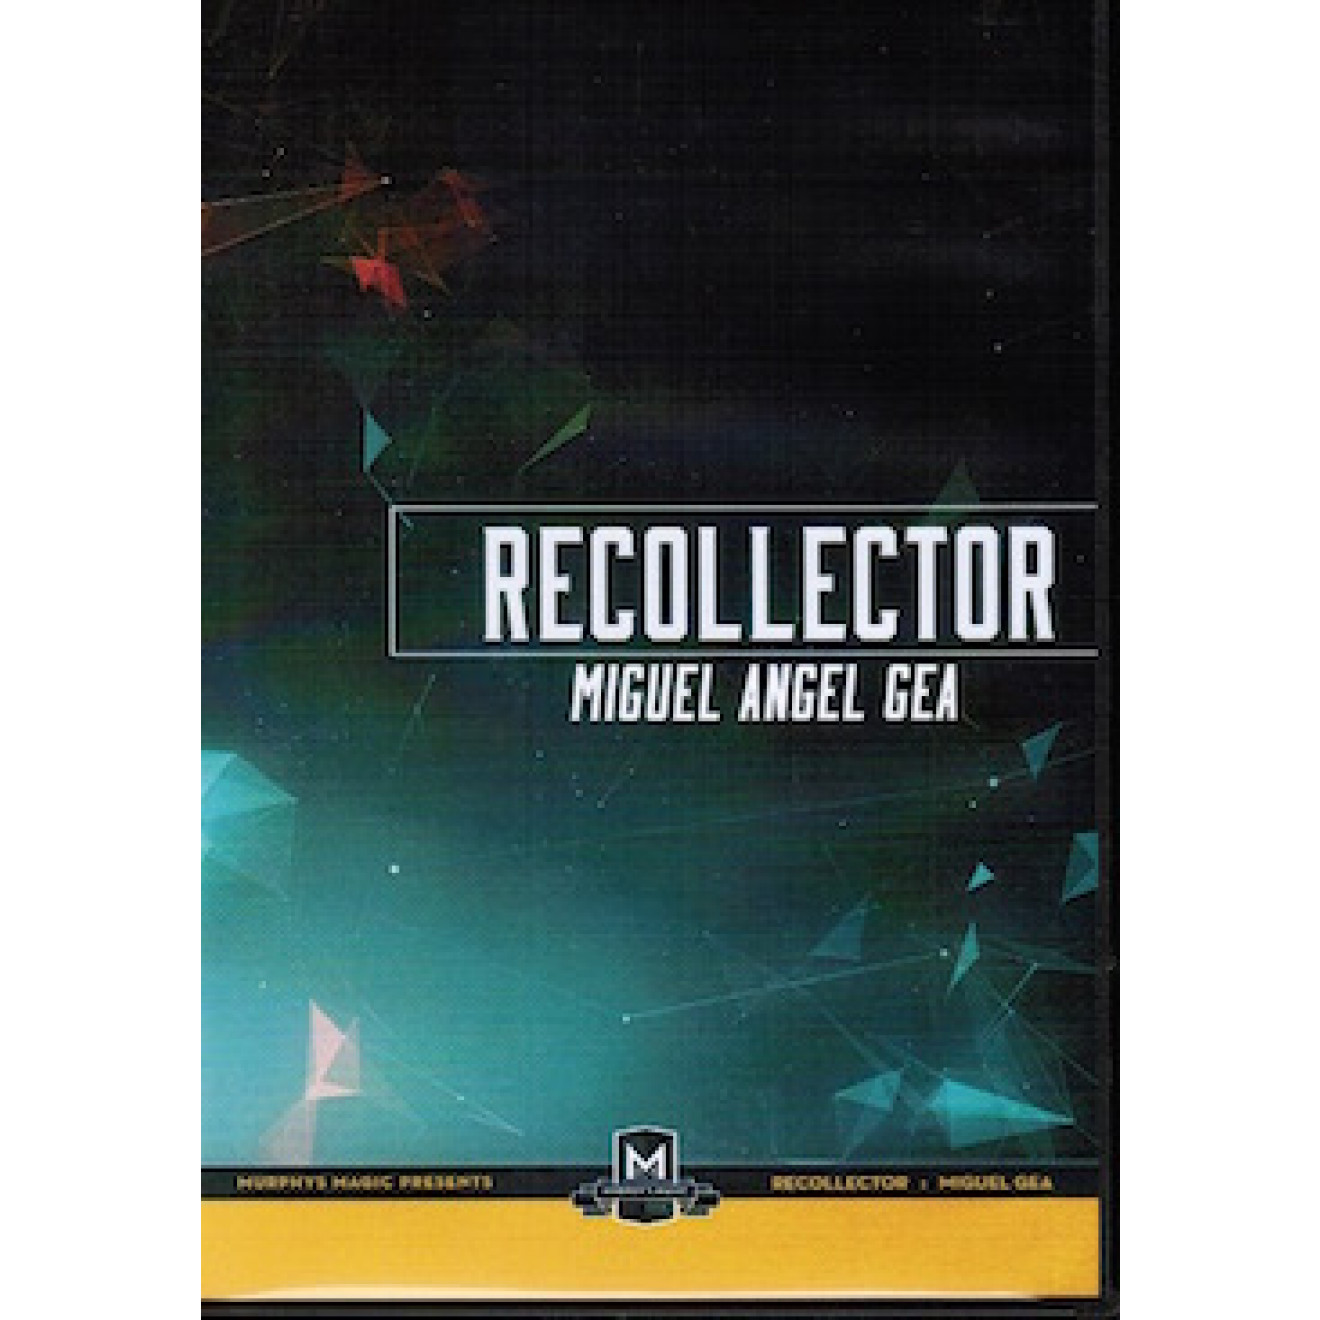 Recollector (DVD and Gimmick)